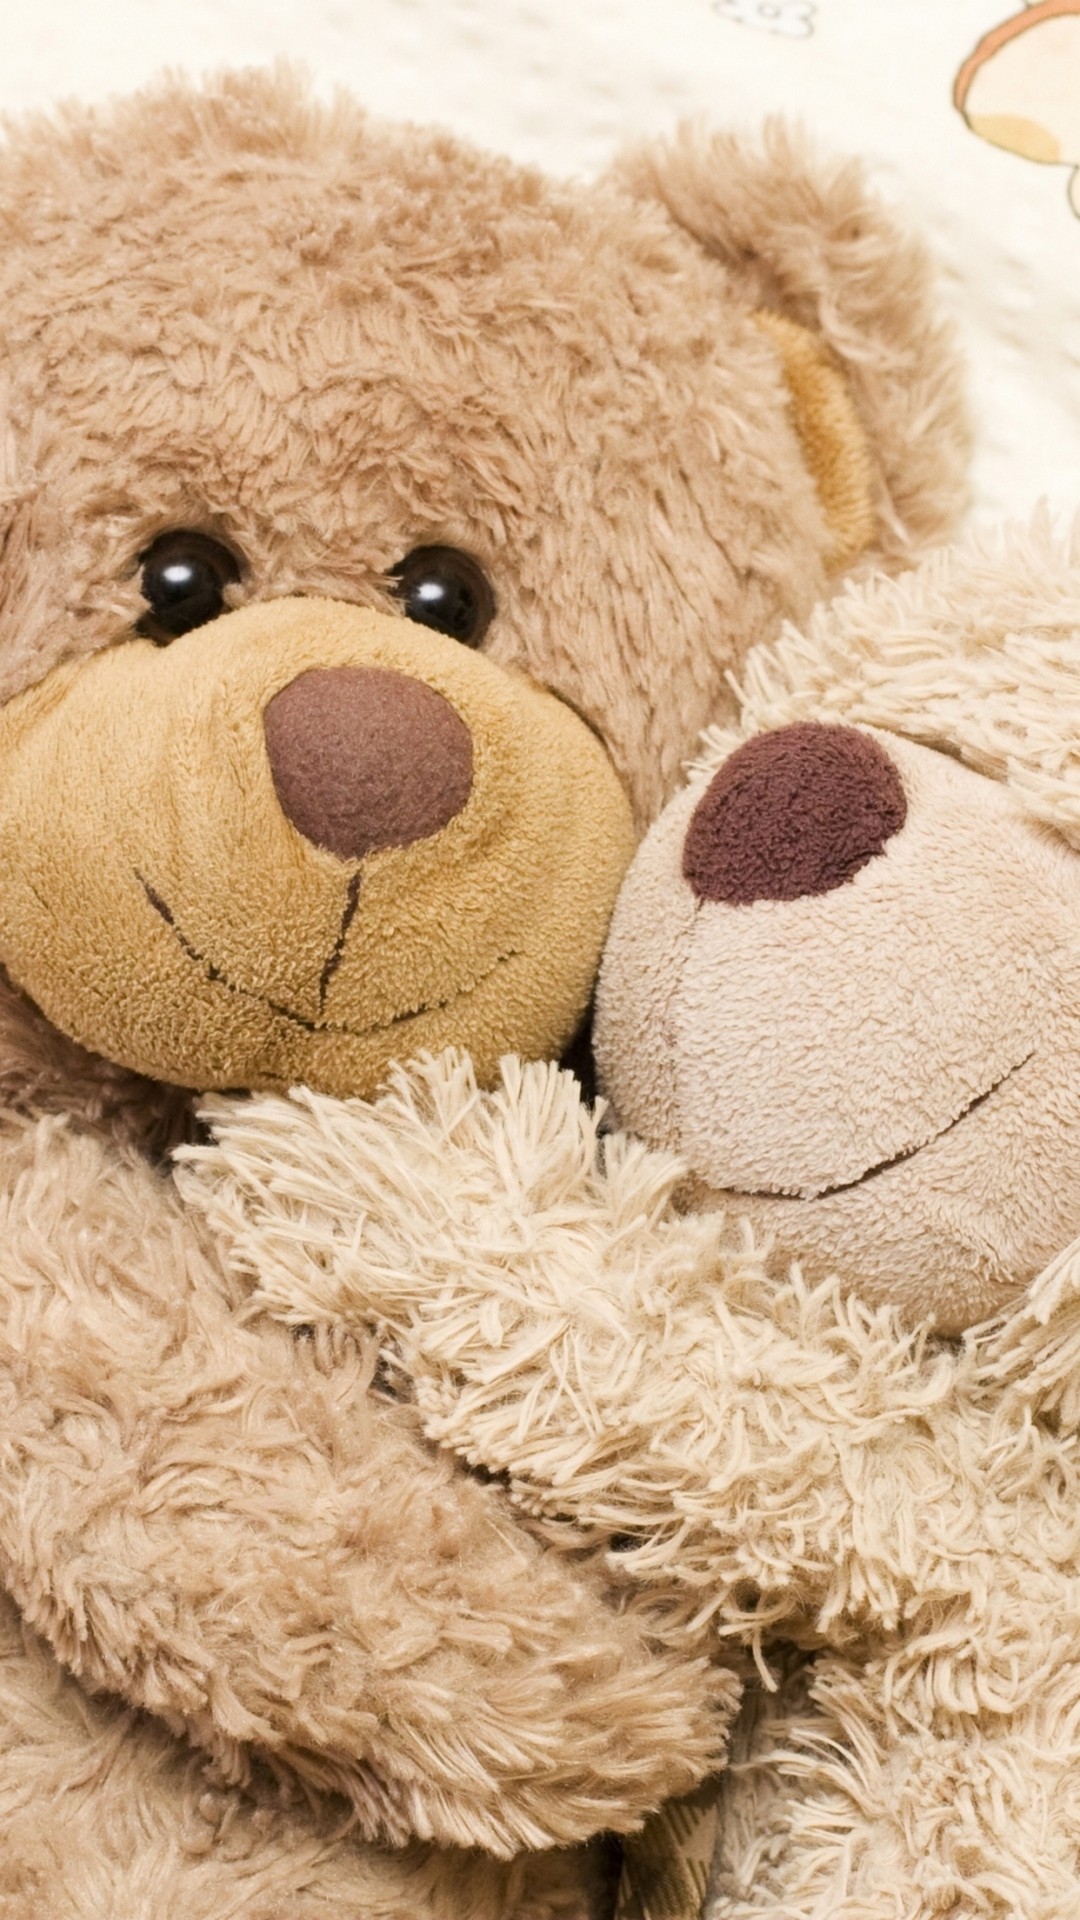 Cute Teddy Bear iPhone X Wallpaper with image resolution 1080x1920 pixel. You can use this wallpaper as background for your desktop Computer Screensavers, Android or iPhone smartphones